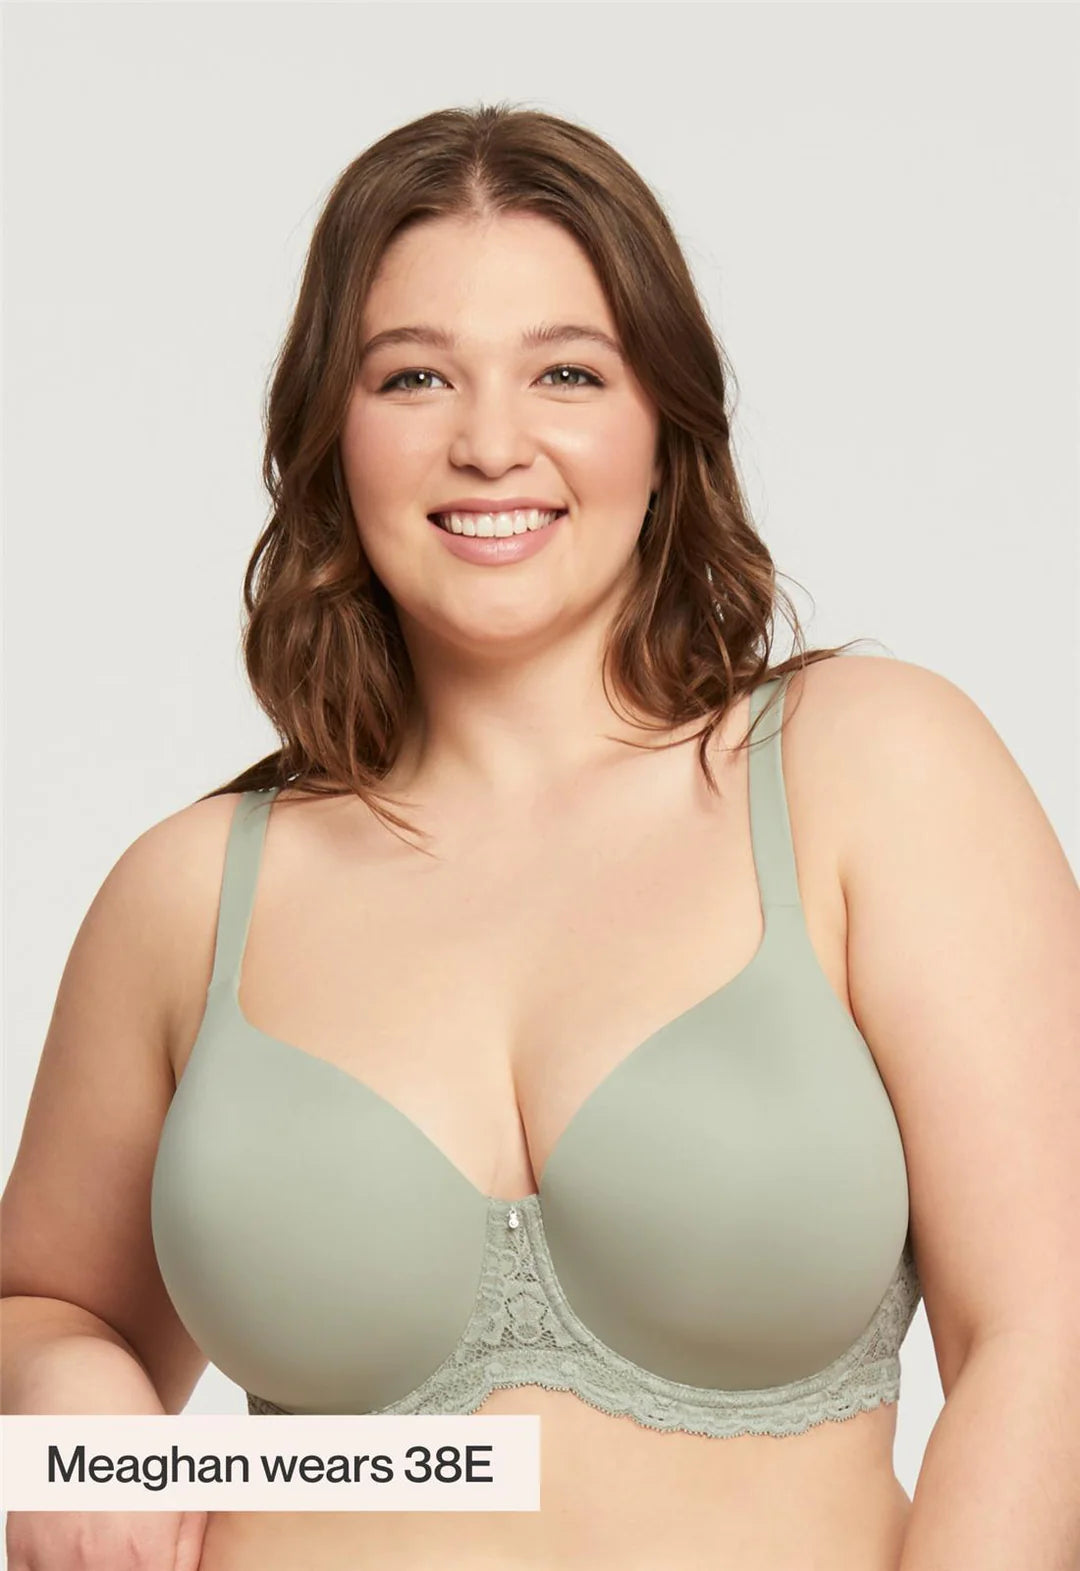 Montelle 9320 Pure Plus Full Coverage T-shirt Bra in Sage